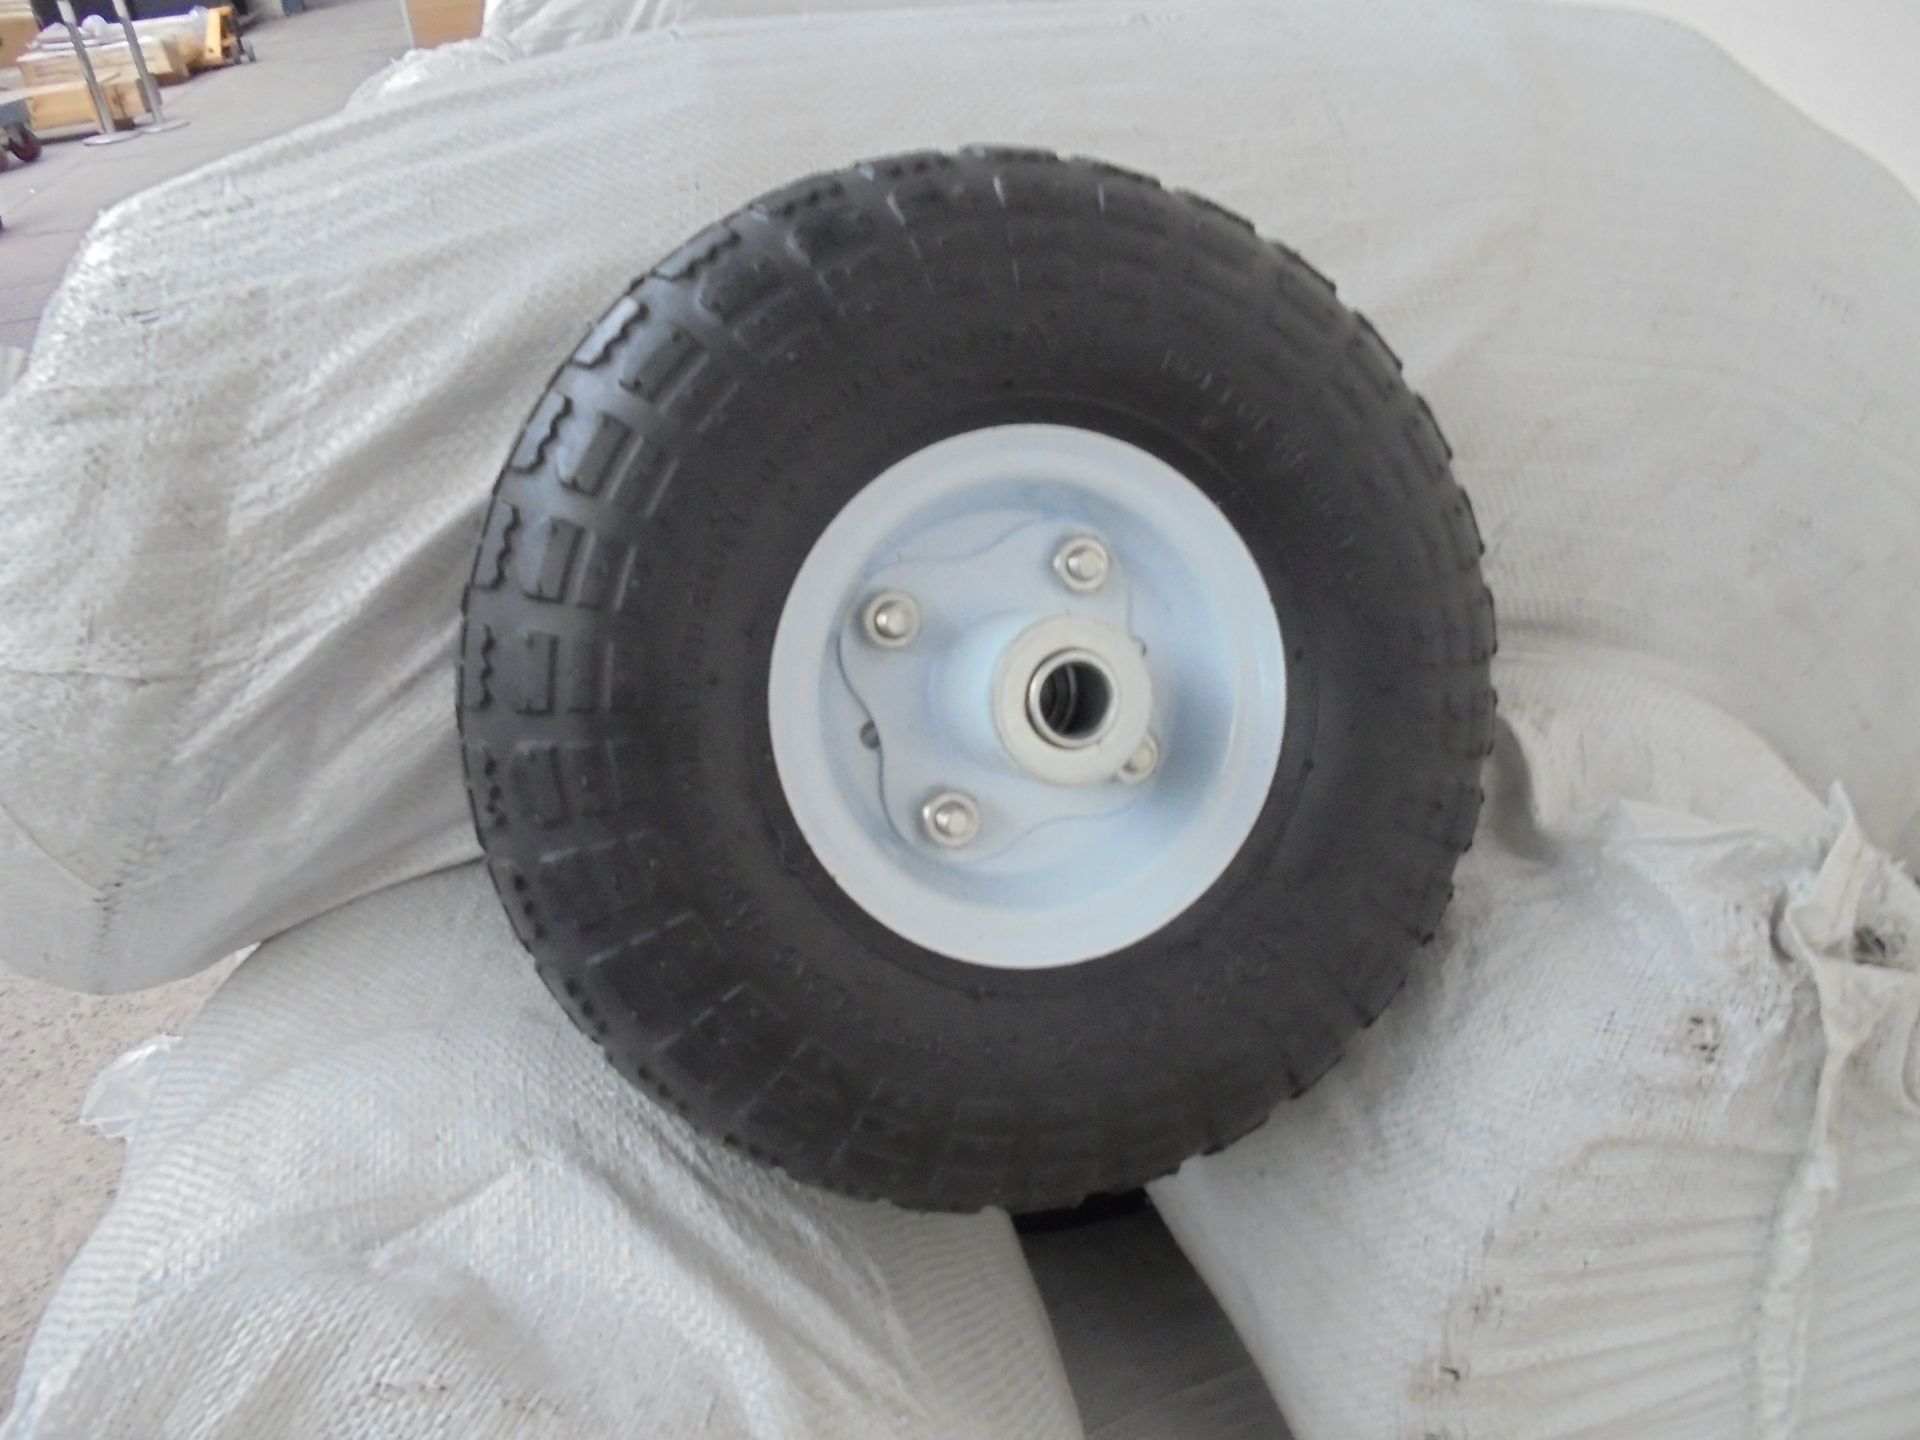 10x Nylon tube tyres for Heavy duty sack trucks, new and all pumped up.